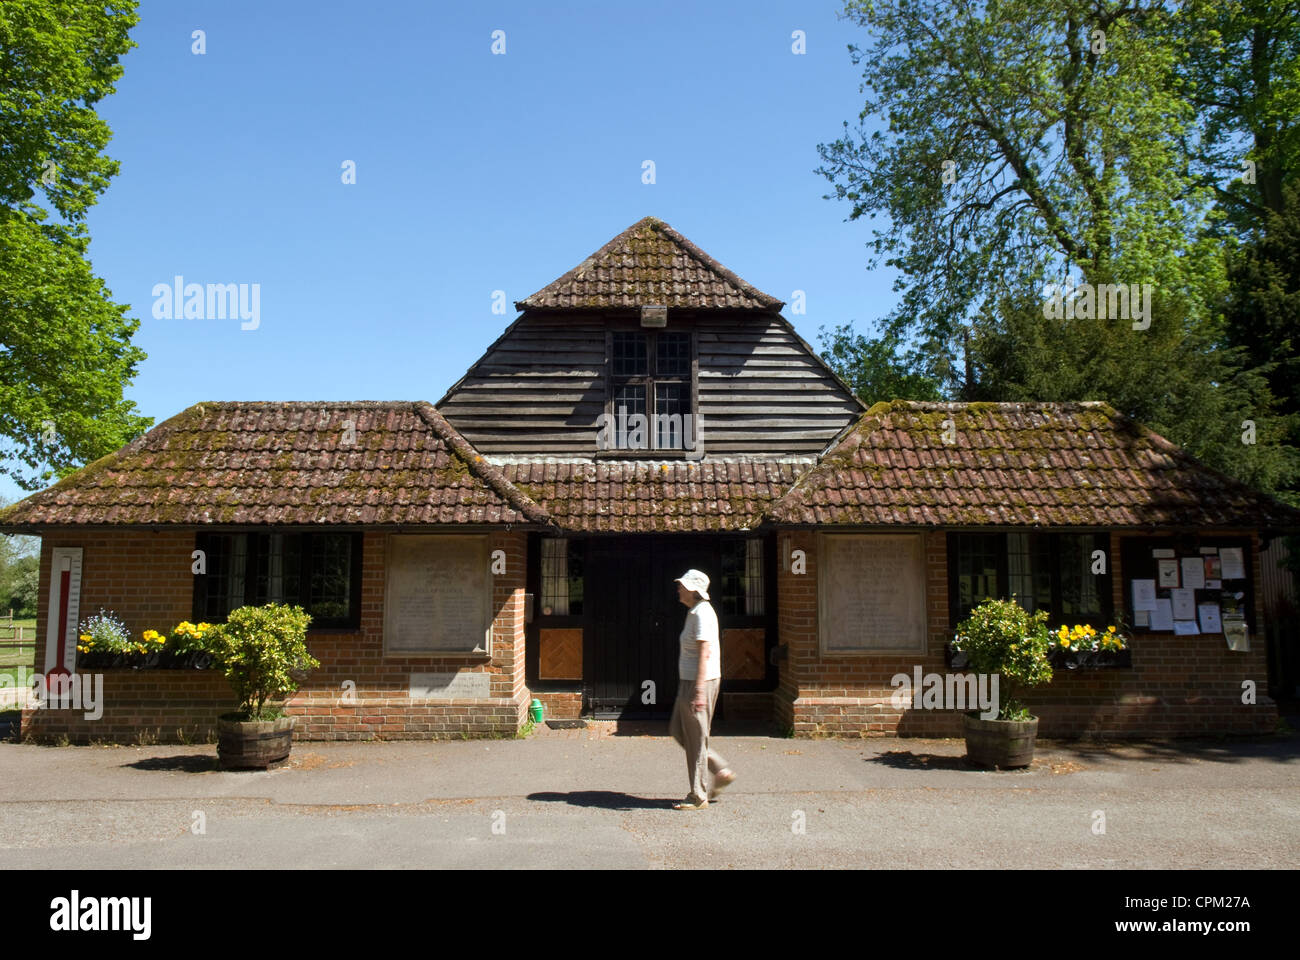 Village Hall in the rural village of Chawton, Hampshire, UK. Stock Photo